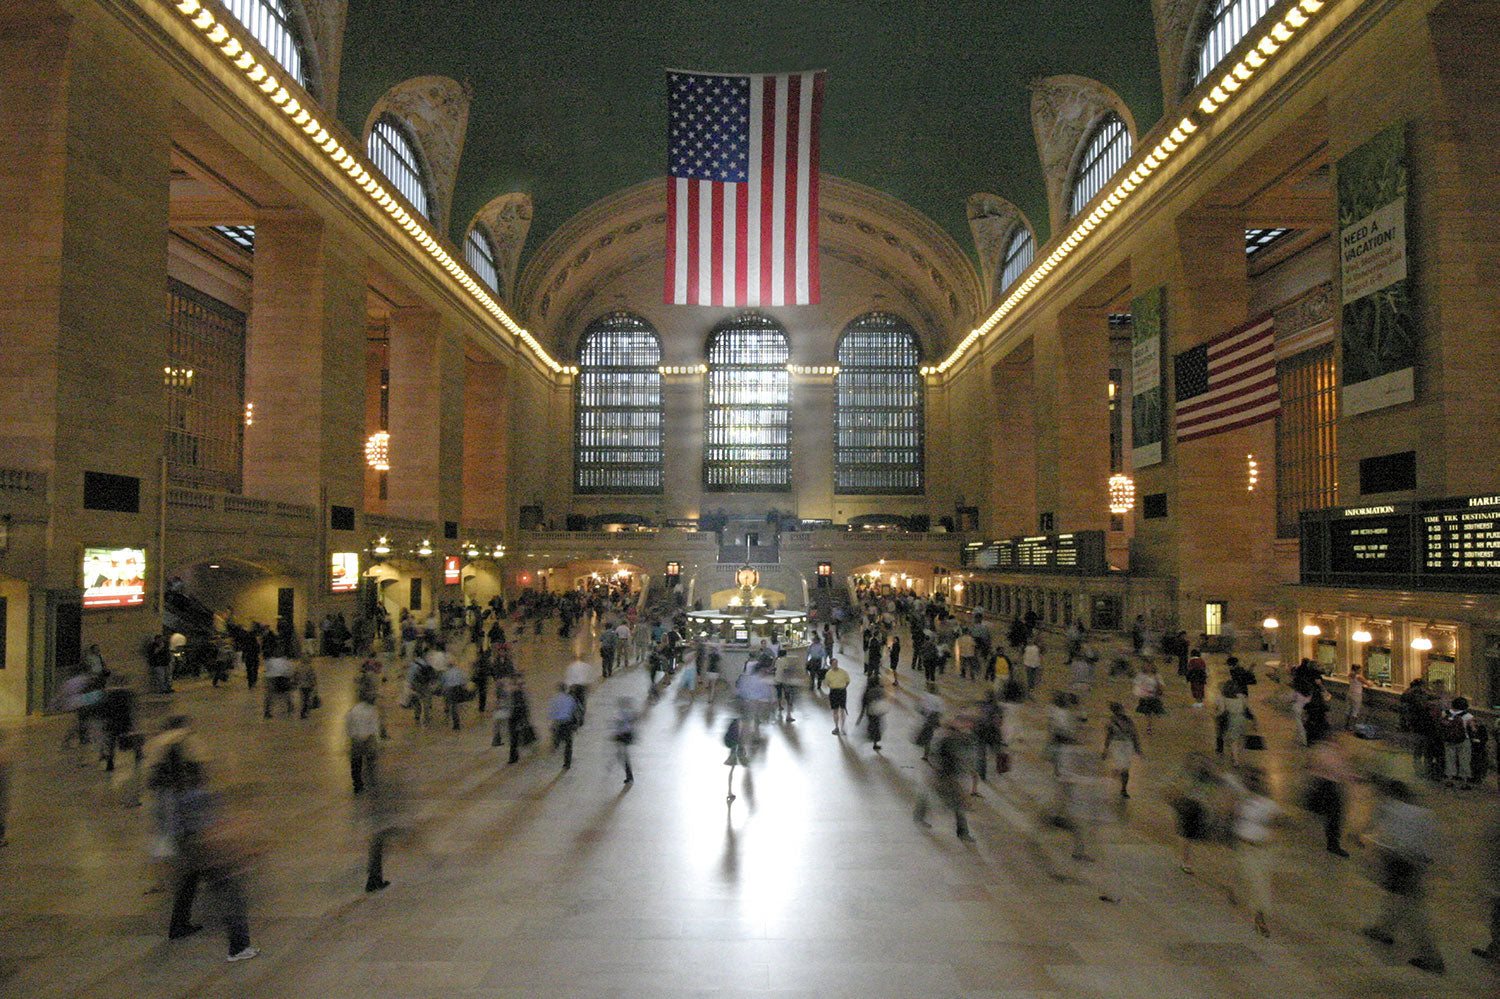 the hustle and bustle of the morning rush hour at Grand Central station